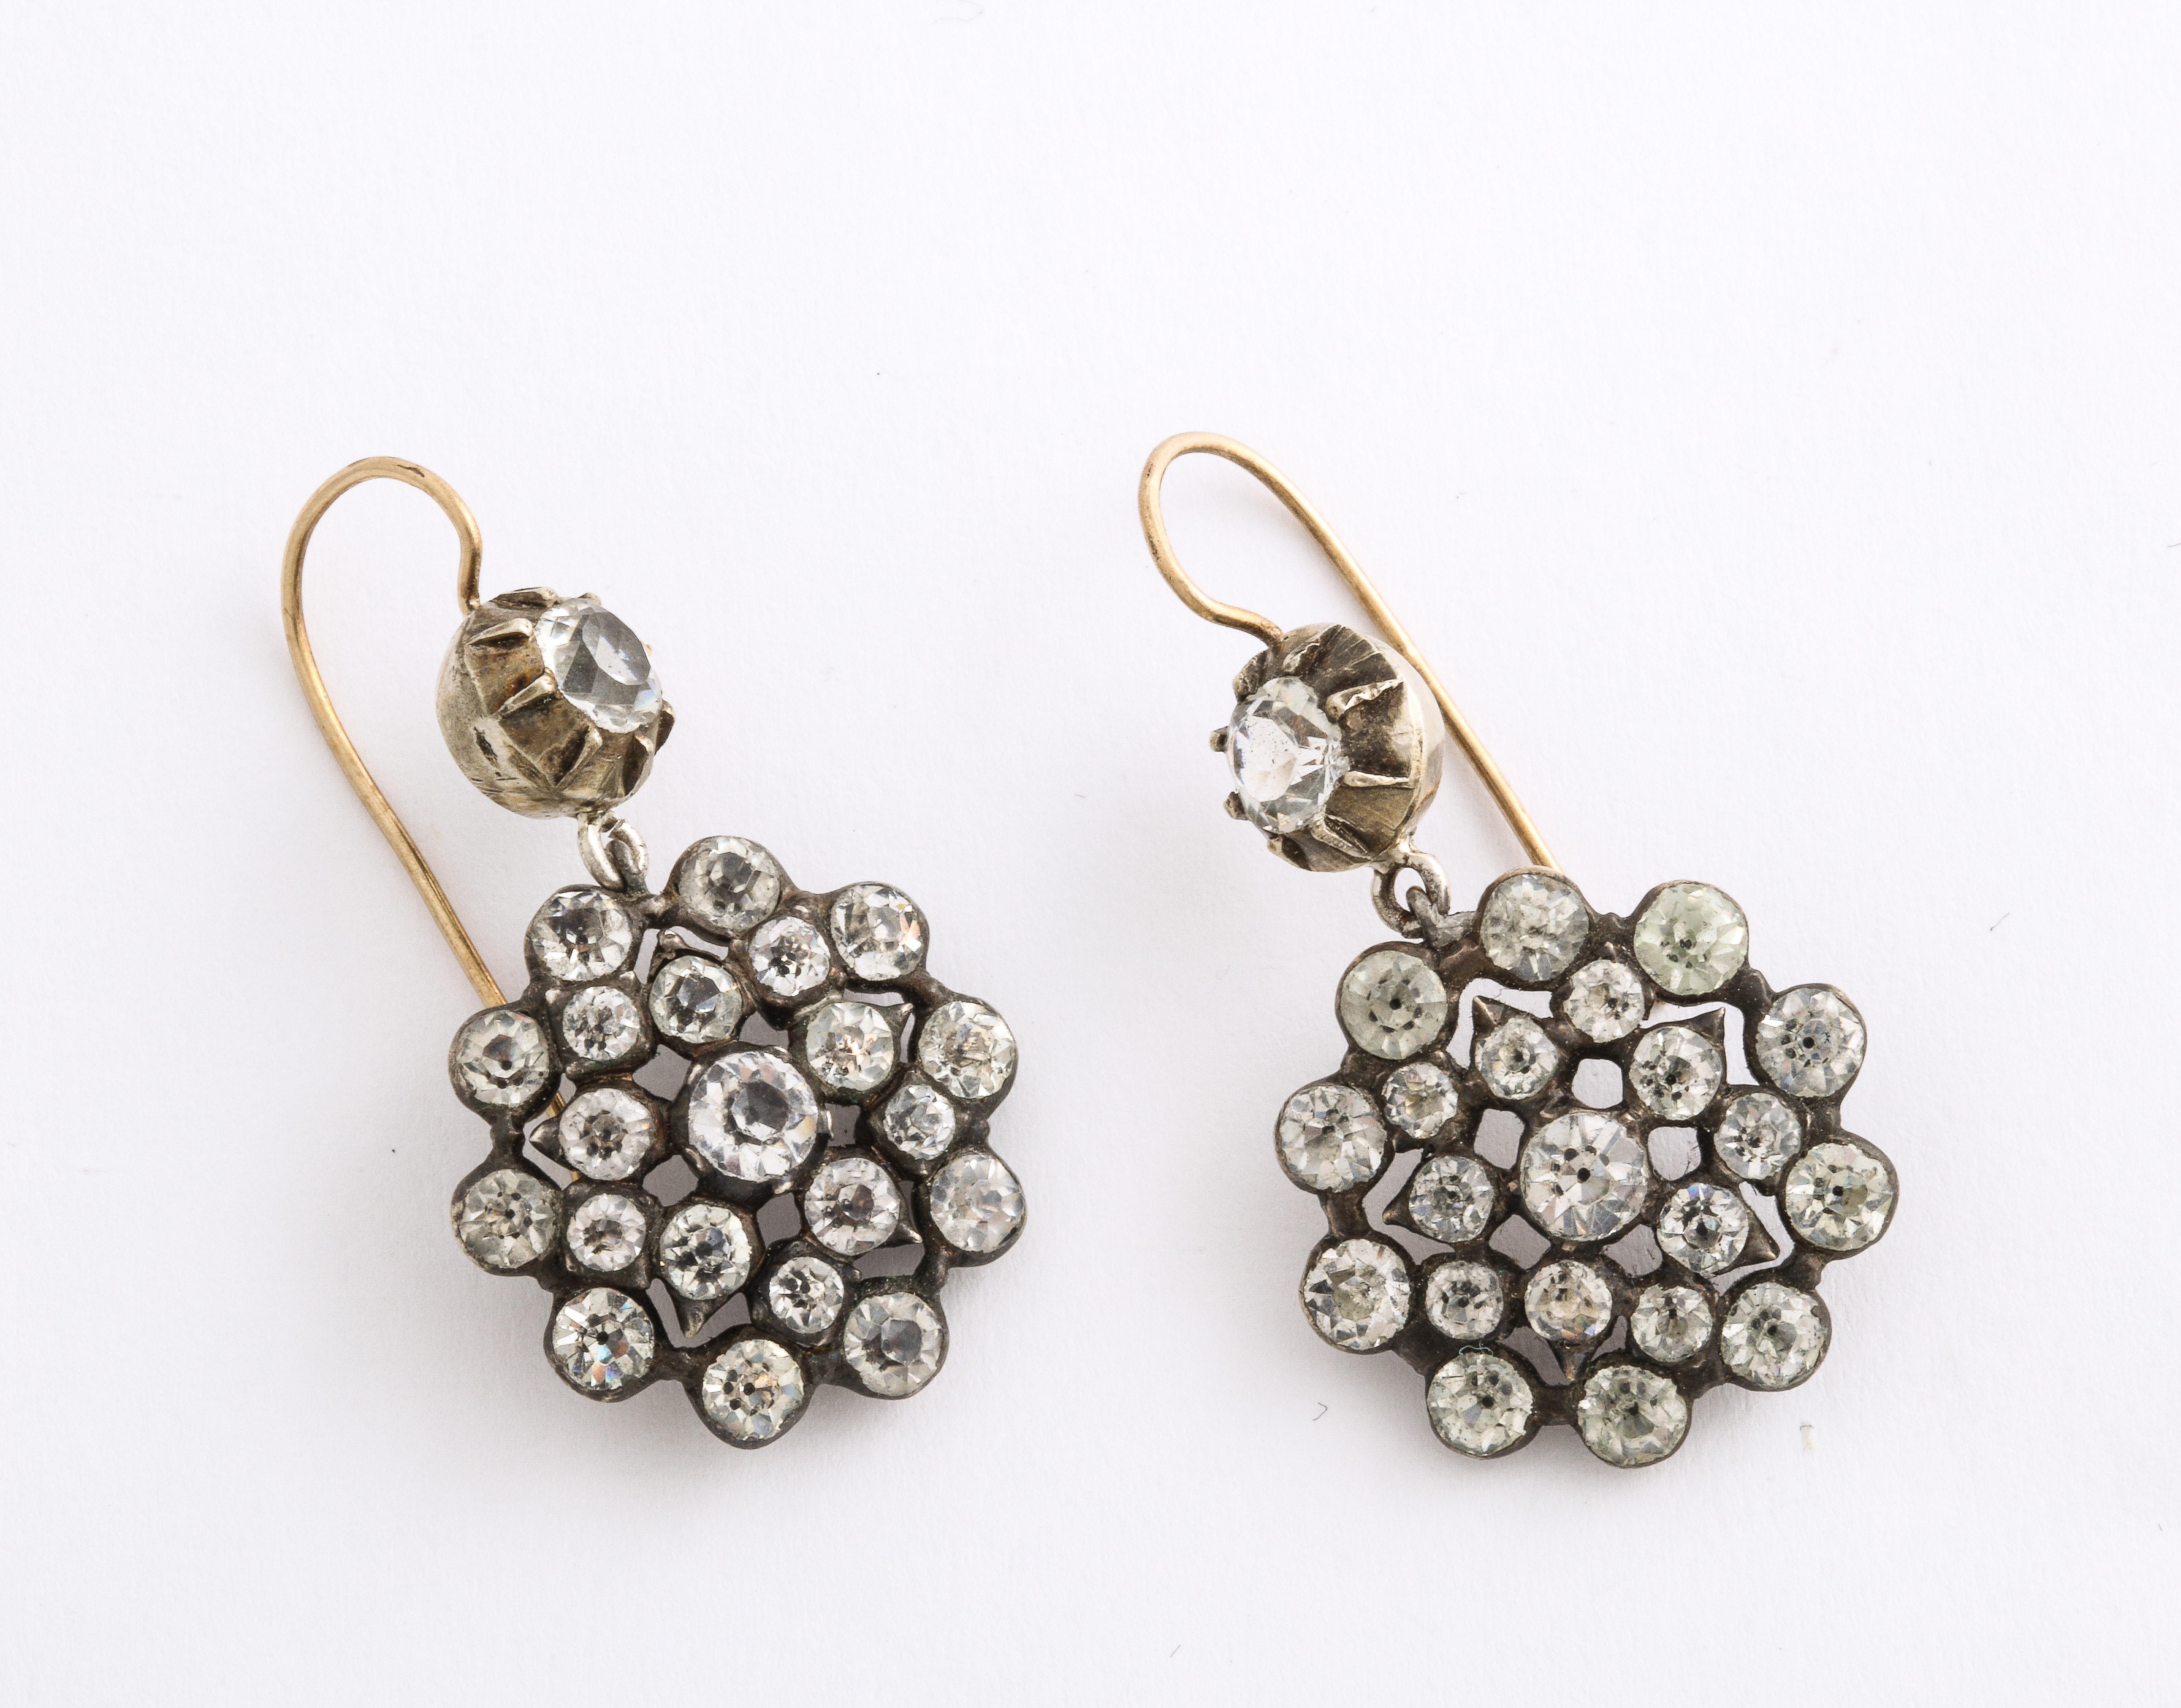 Black dot paste are set in a silver snowflake pattern that sway from your ears in these Georgian earrings. The ear wires are gold.
Paste was an art form that dated back to the ancient veneration of glass. It was not an imitation jewel. The paste